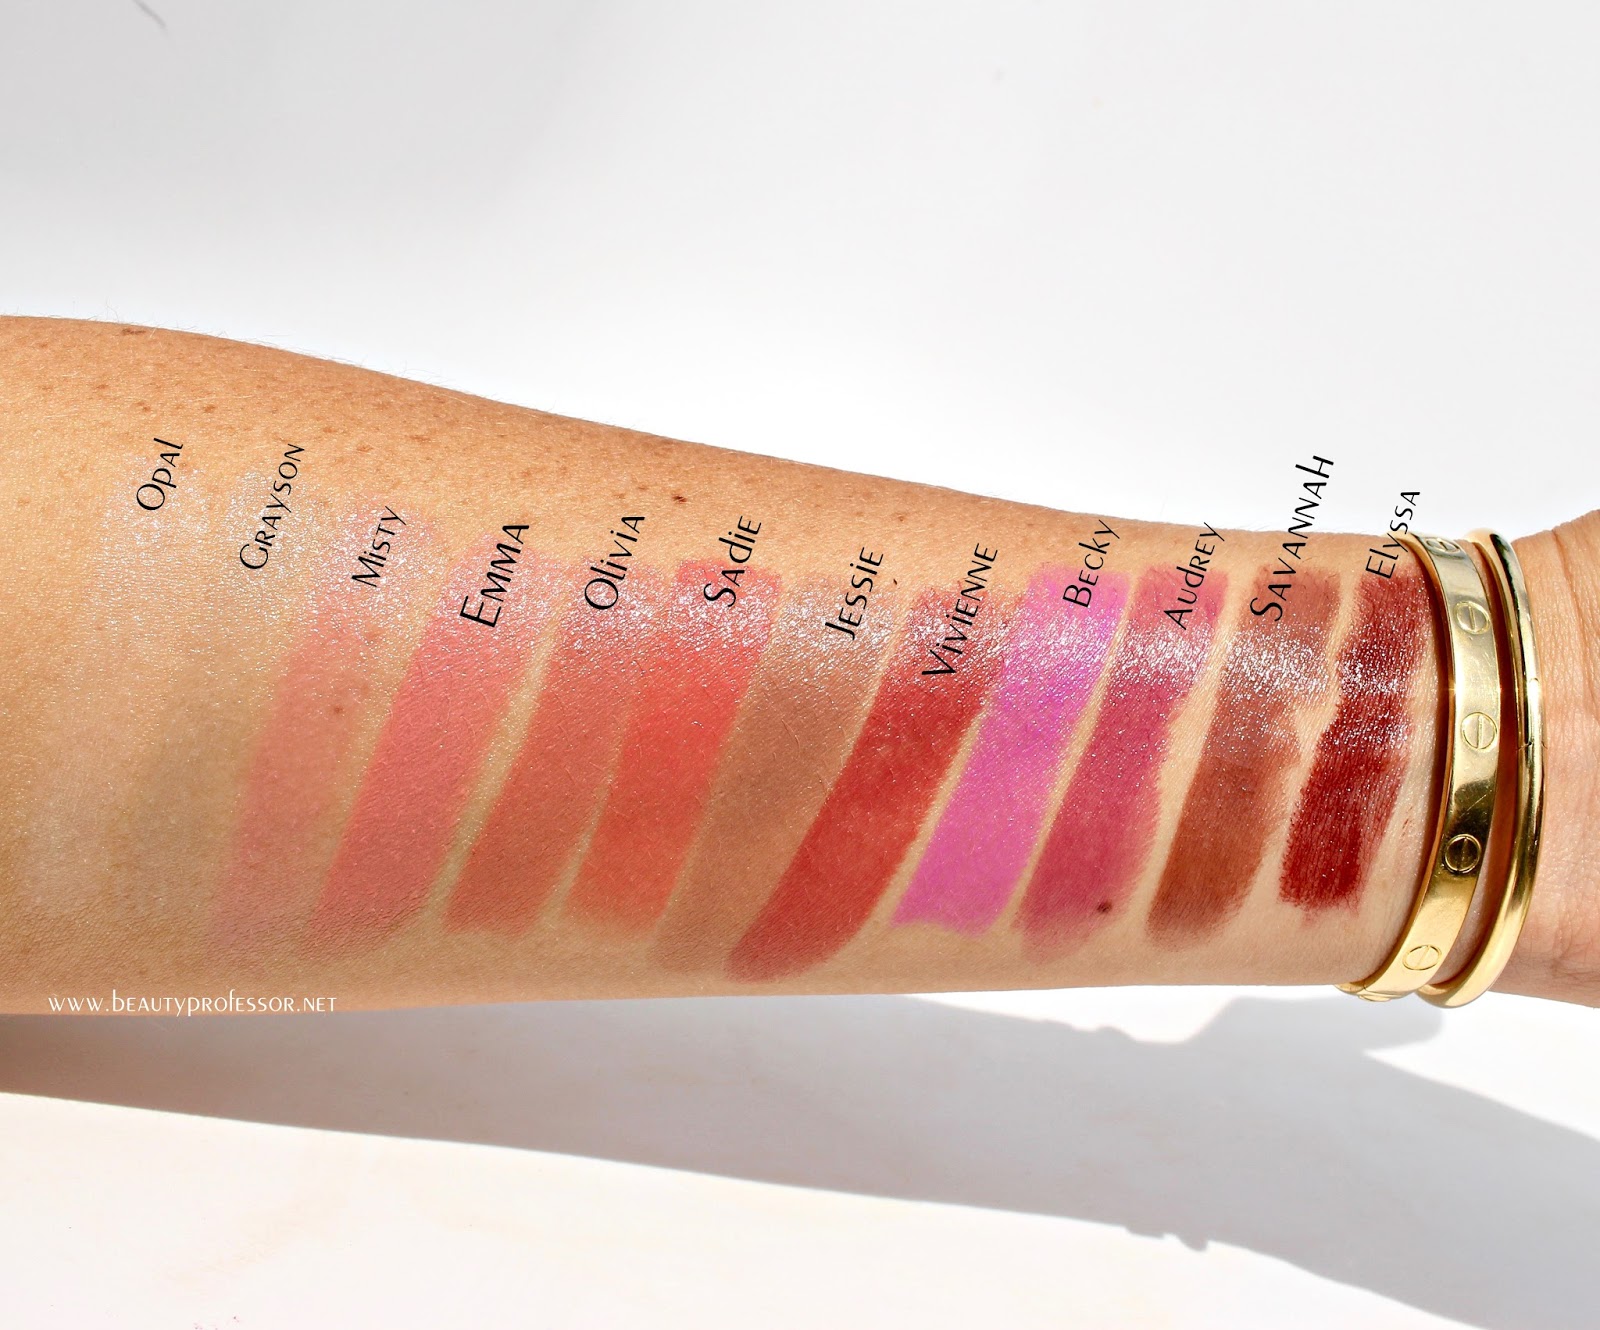 Swatches of the Stila Color Balm Lipstick in direct sunlight. 